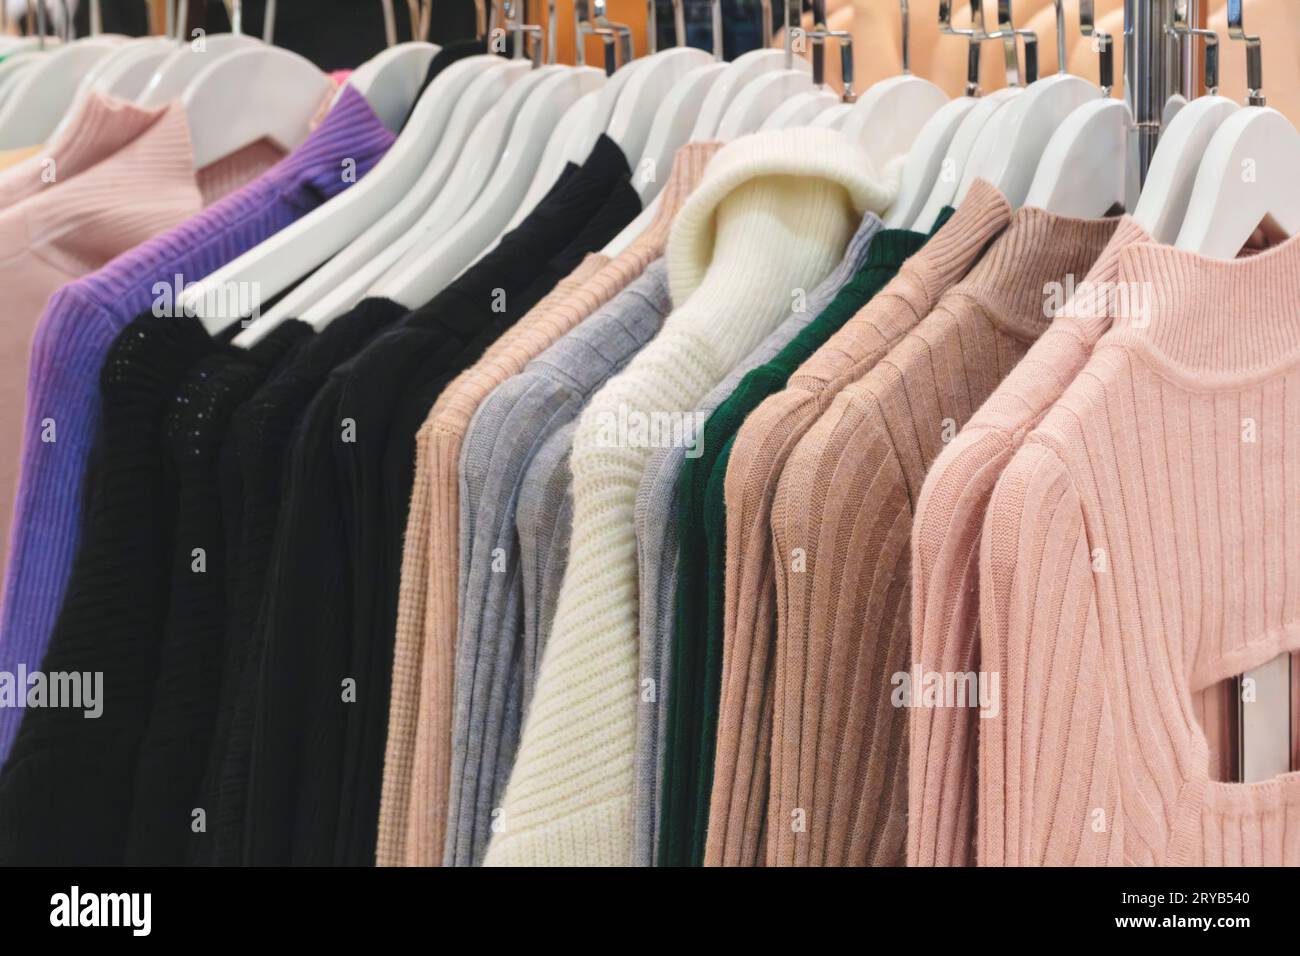 Women's sweaters on a hanger in a store. Classic women's fashion clothing. Stock Photo